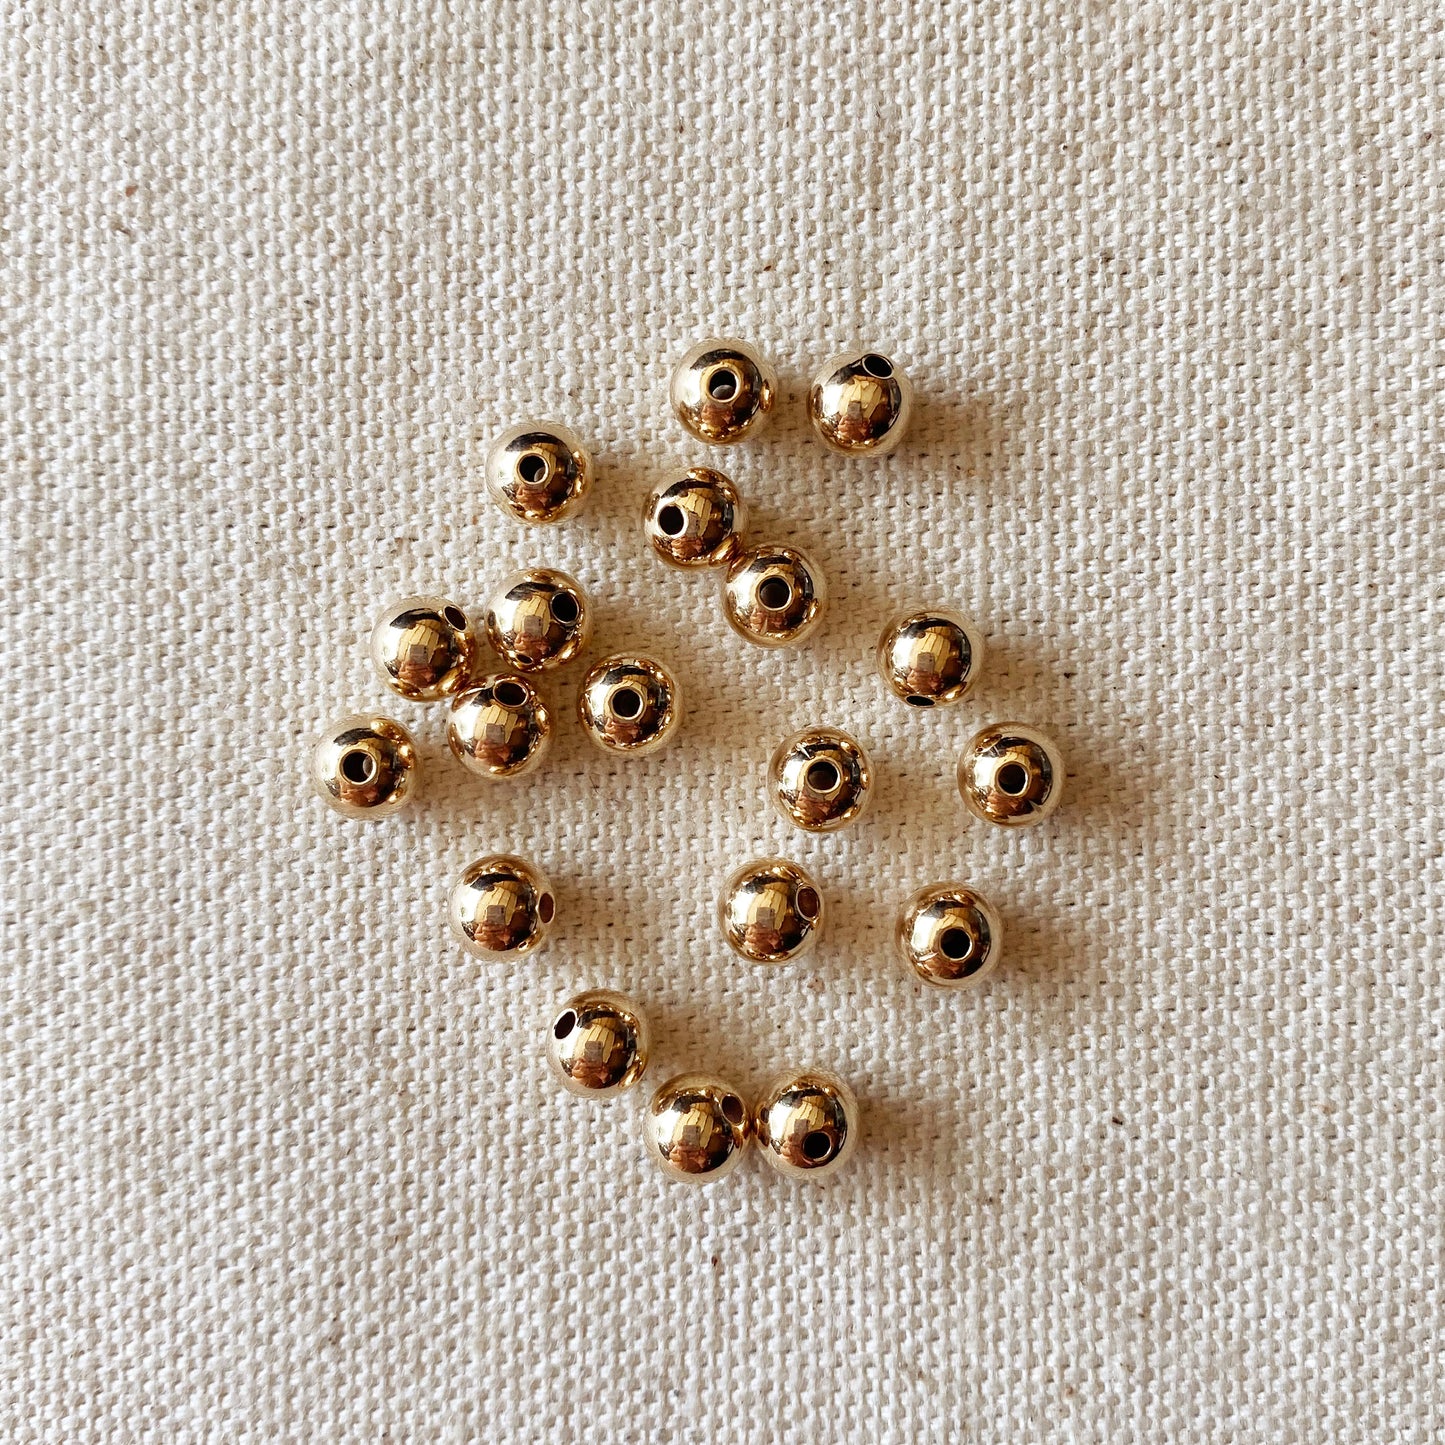 GoldFi 14k Gold Filled 6.0mm Bead For Jewelry Making.